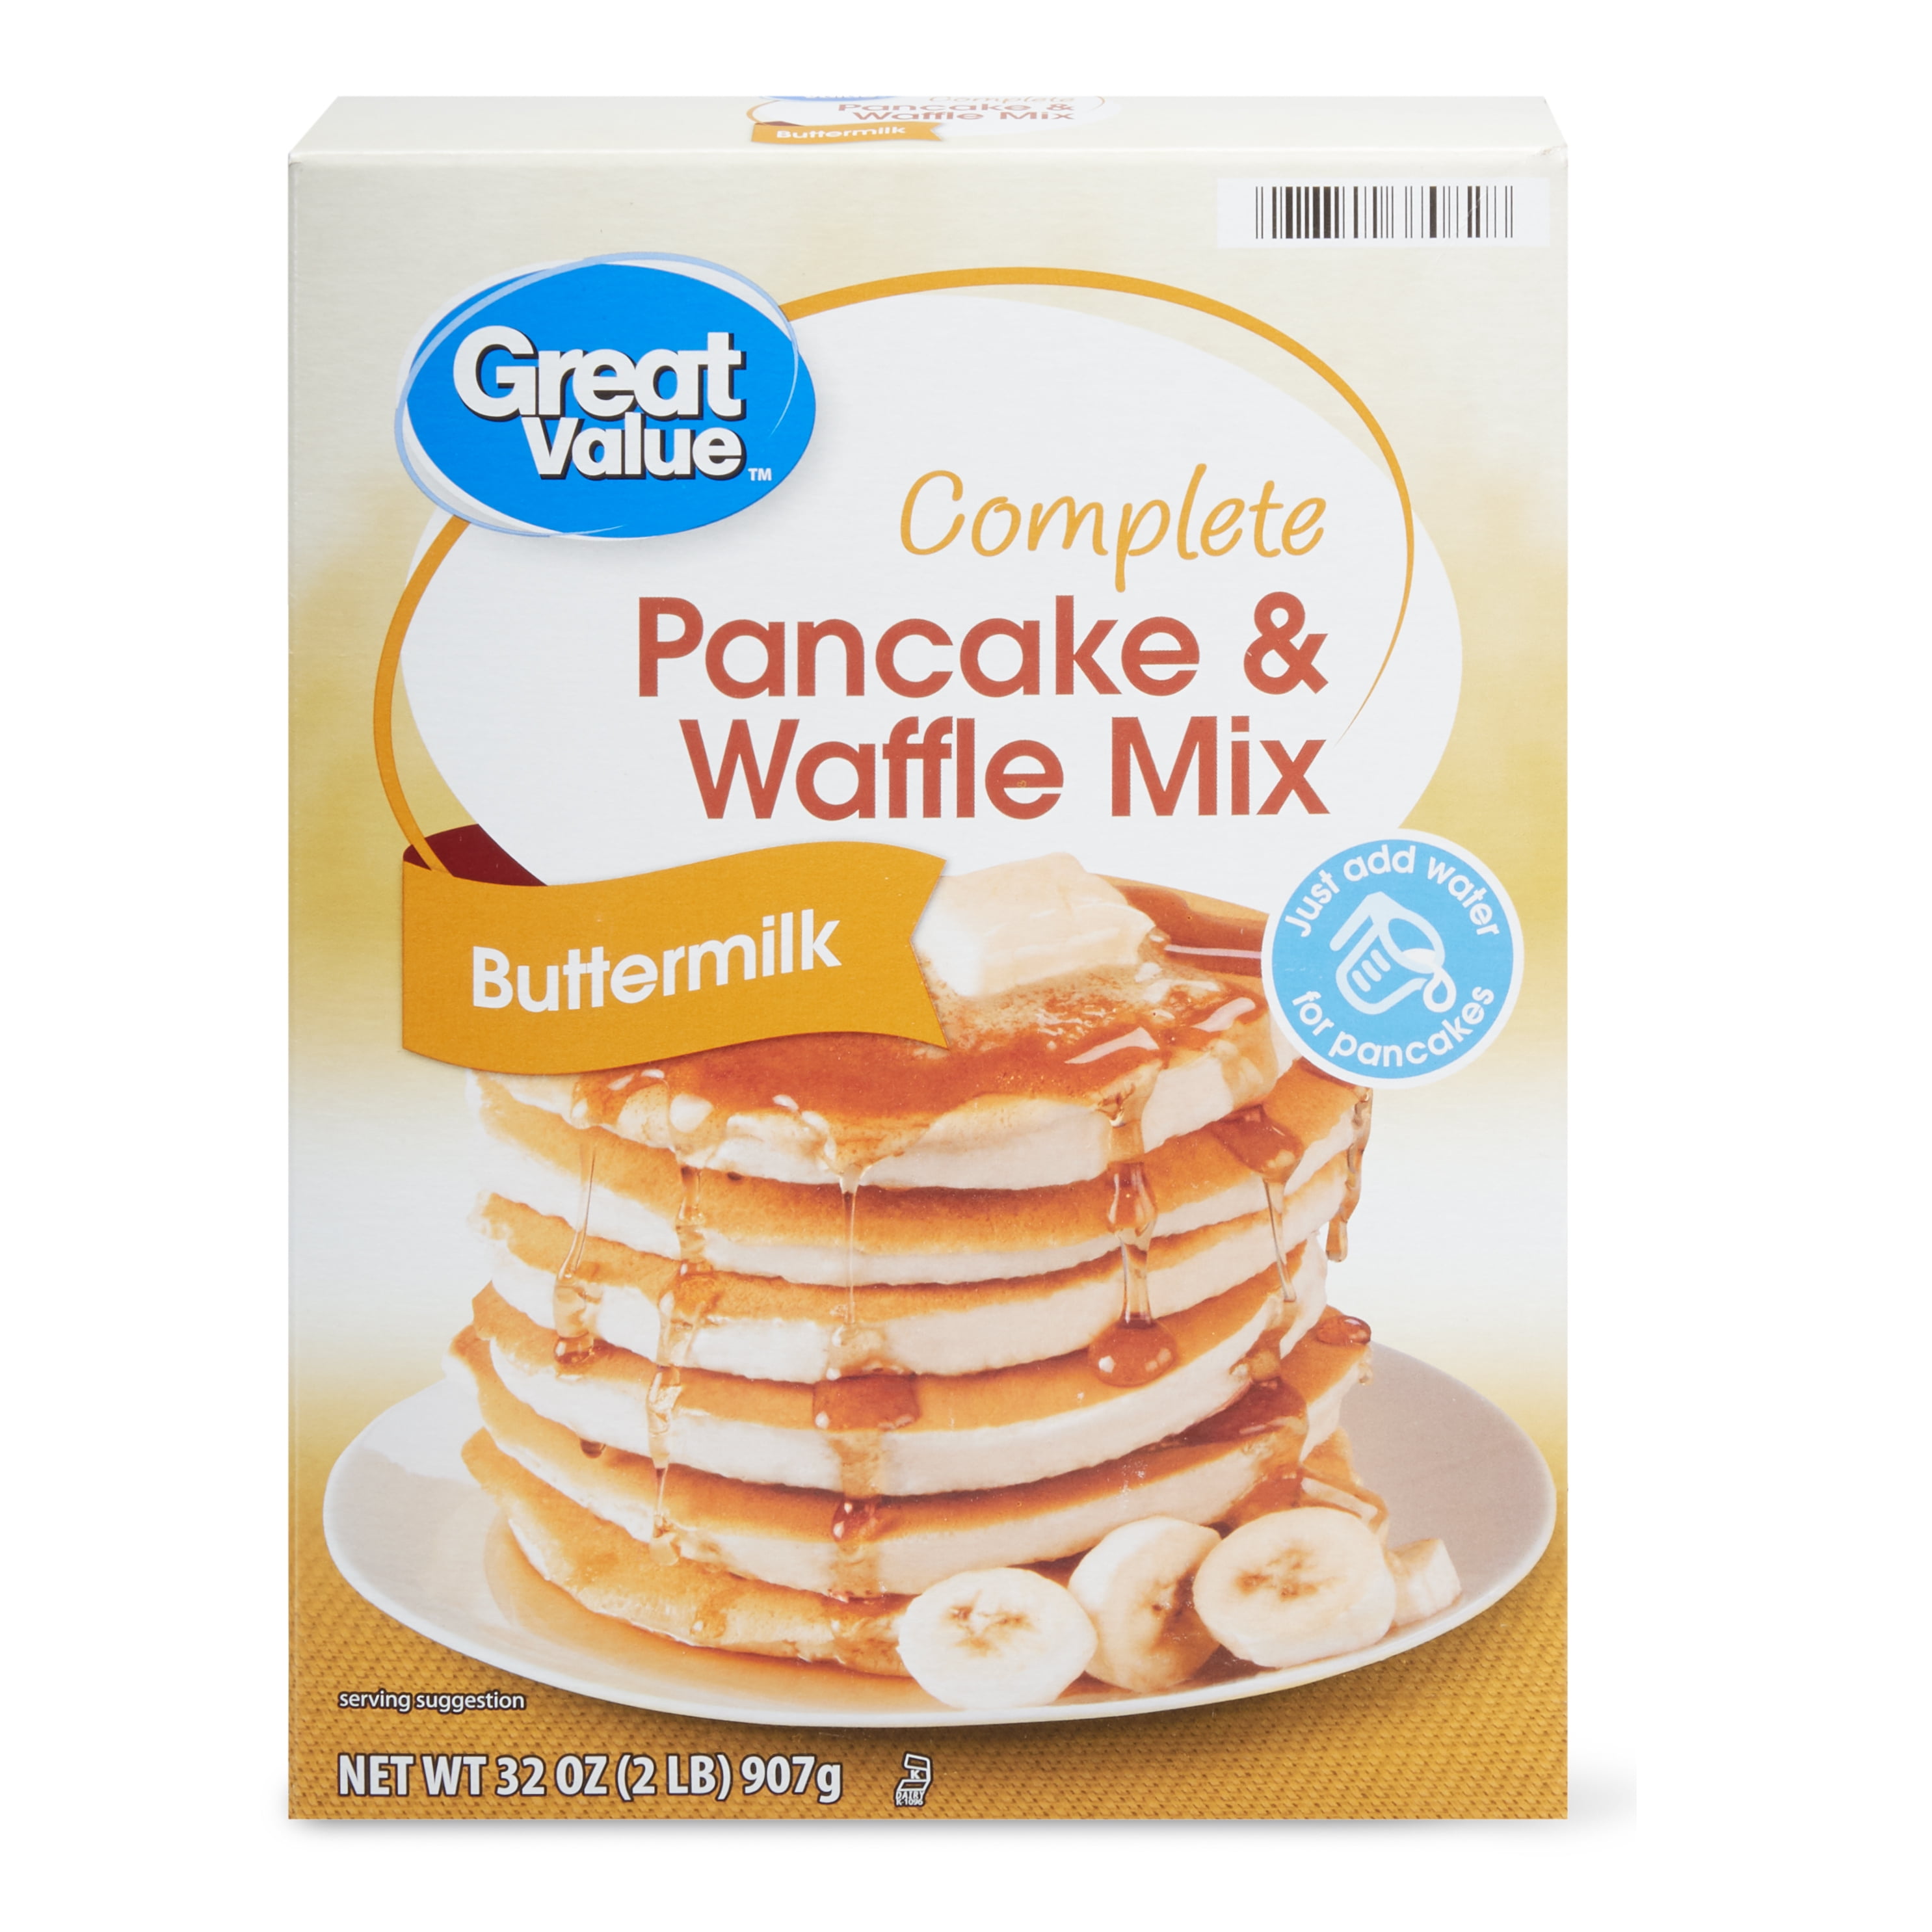 Great Value Complete Pancake & Waffle Mix, Buttermilk, 32 oz